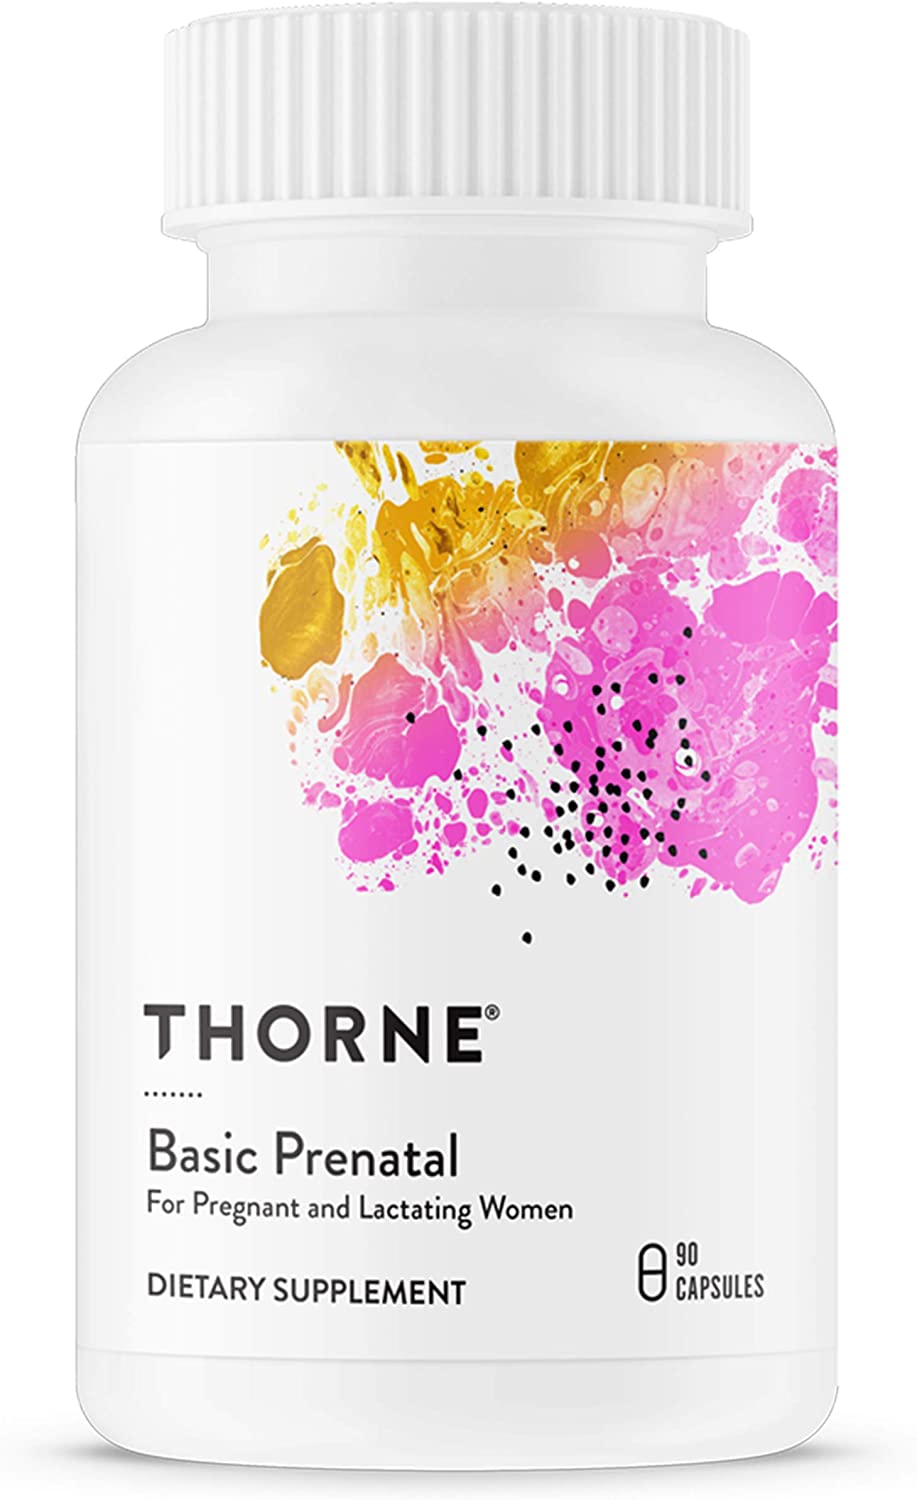 Thorne Basic Prenatal – Well-Researched Folate Multi for Pregnant and Nursing Women Includes 18 Vitamins and Minerals, Plus Choline – 90 Capsules – 30 Servings